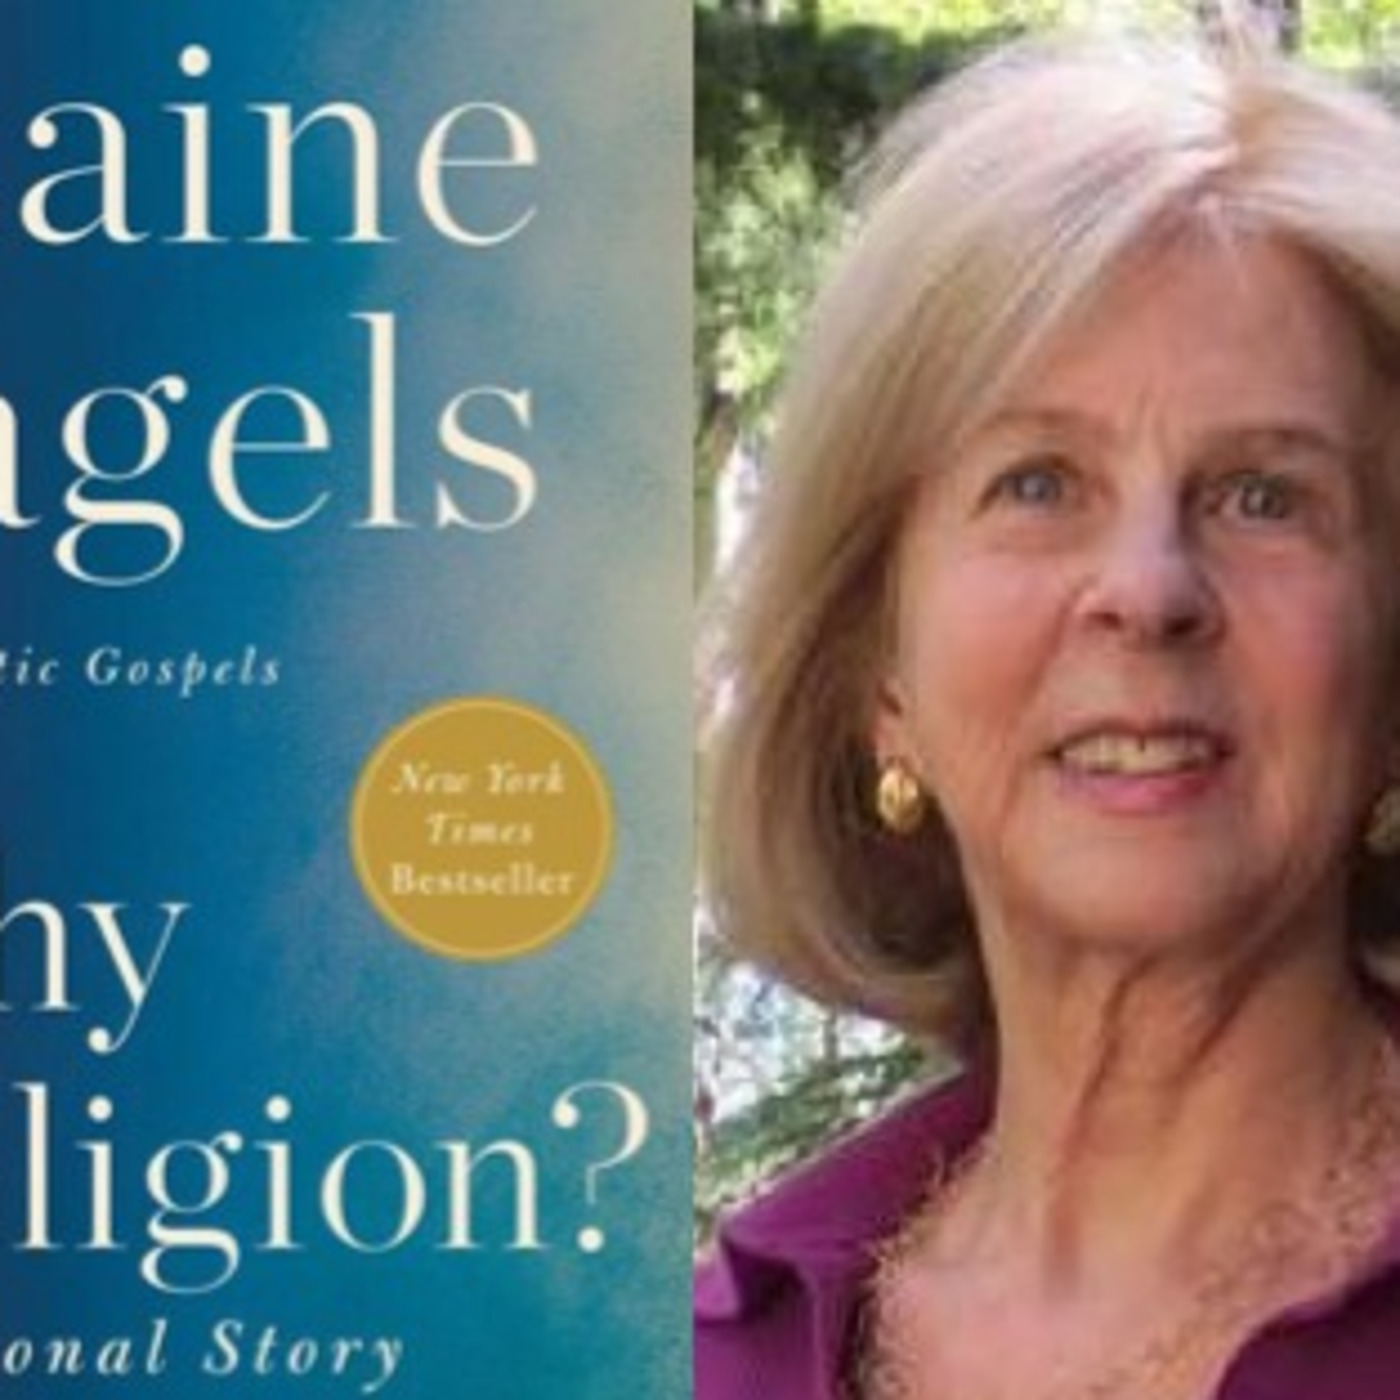 NEW-ELAINE PAGELS-Why Religion: A Personal Story